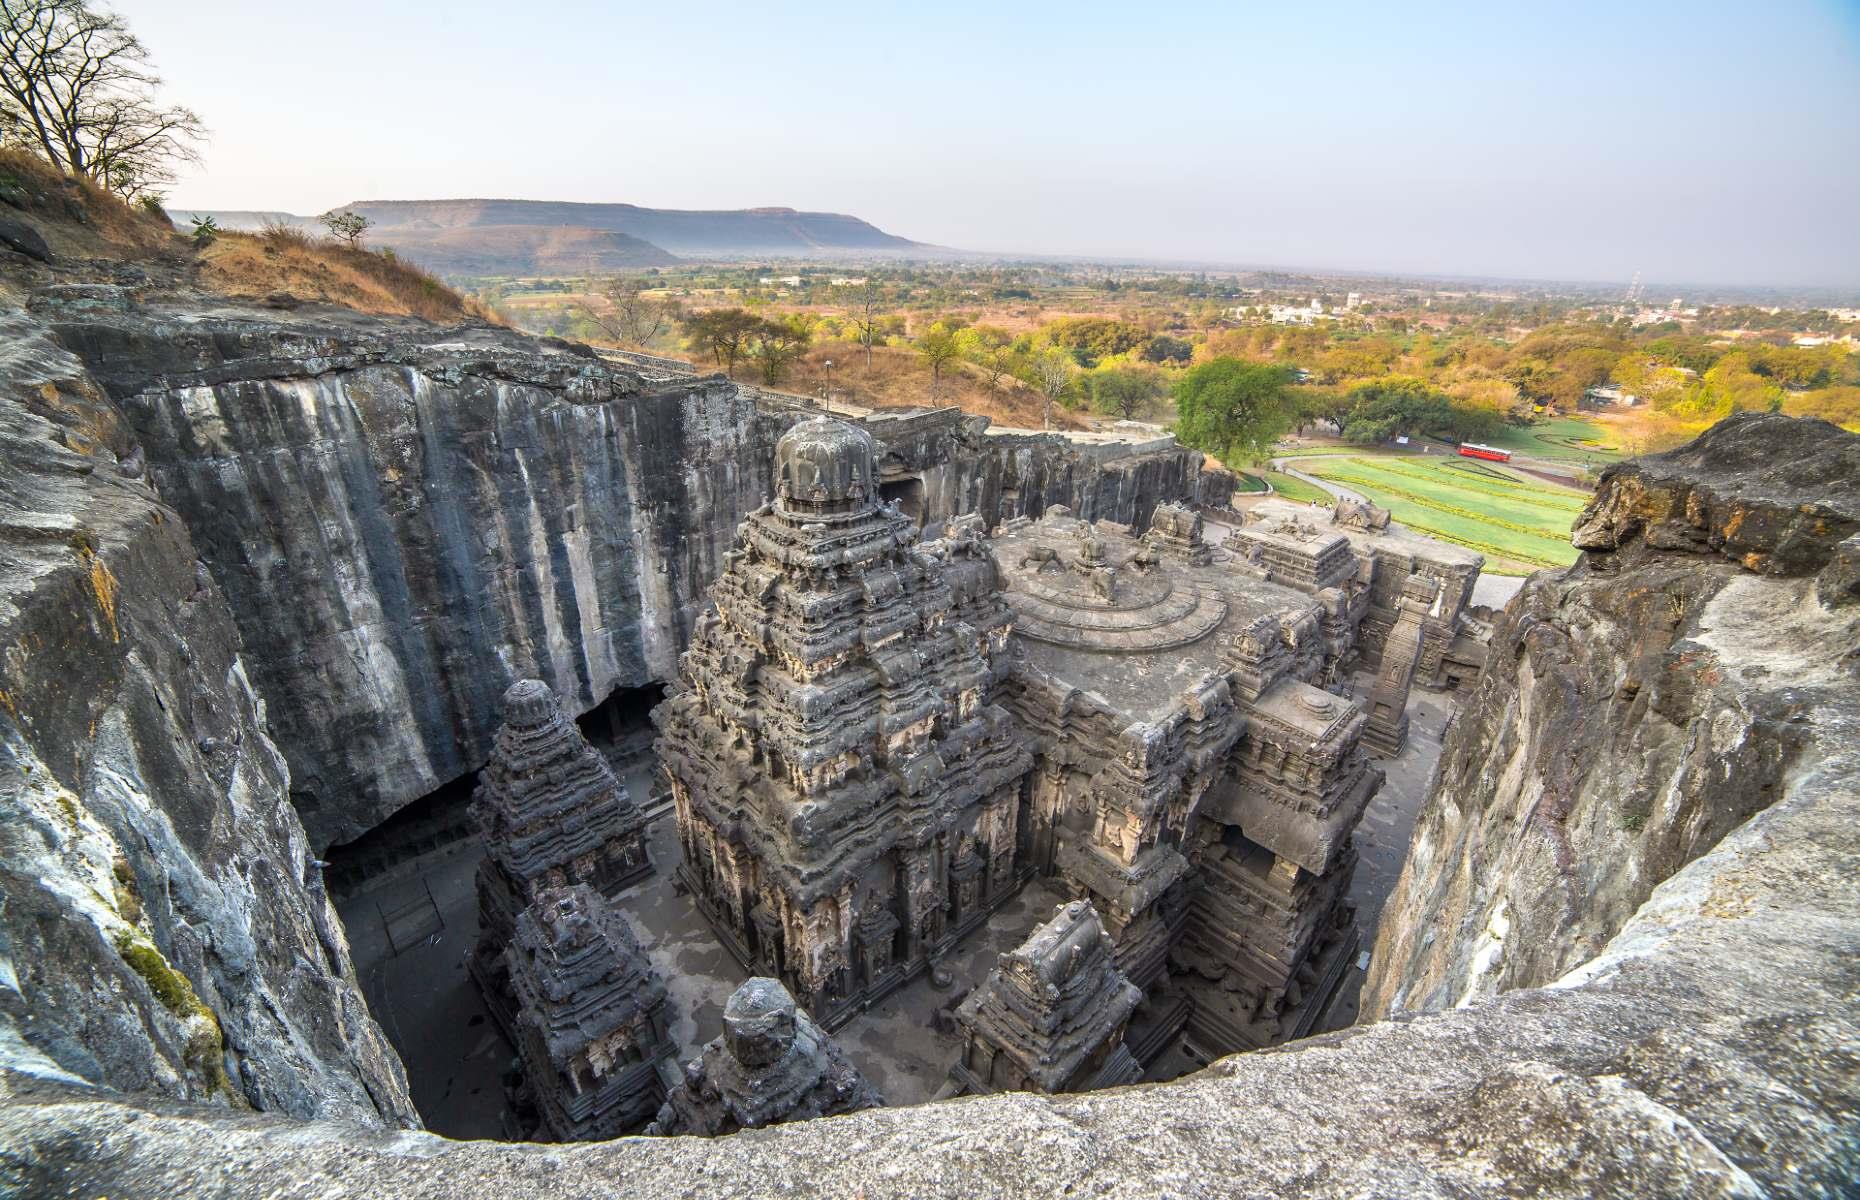 <p>Hindus, Buddhists and Jains have worshiped at the magnificent Ellora Caves for thousands of years. Carved from volcanic basalt stone, the sprawling site was formed somewhere between AD 550 and 750 and is home to Kailasa Temple, the largest rock-cut monument in the world. But with 34 caves in total open to the public, each containing elaborate carvings of gods, flowers and elephants, there are plenty of spots to explore. Take a guided tour from the city of Aurangabad (a 45-minute drive away).</p>